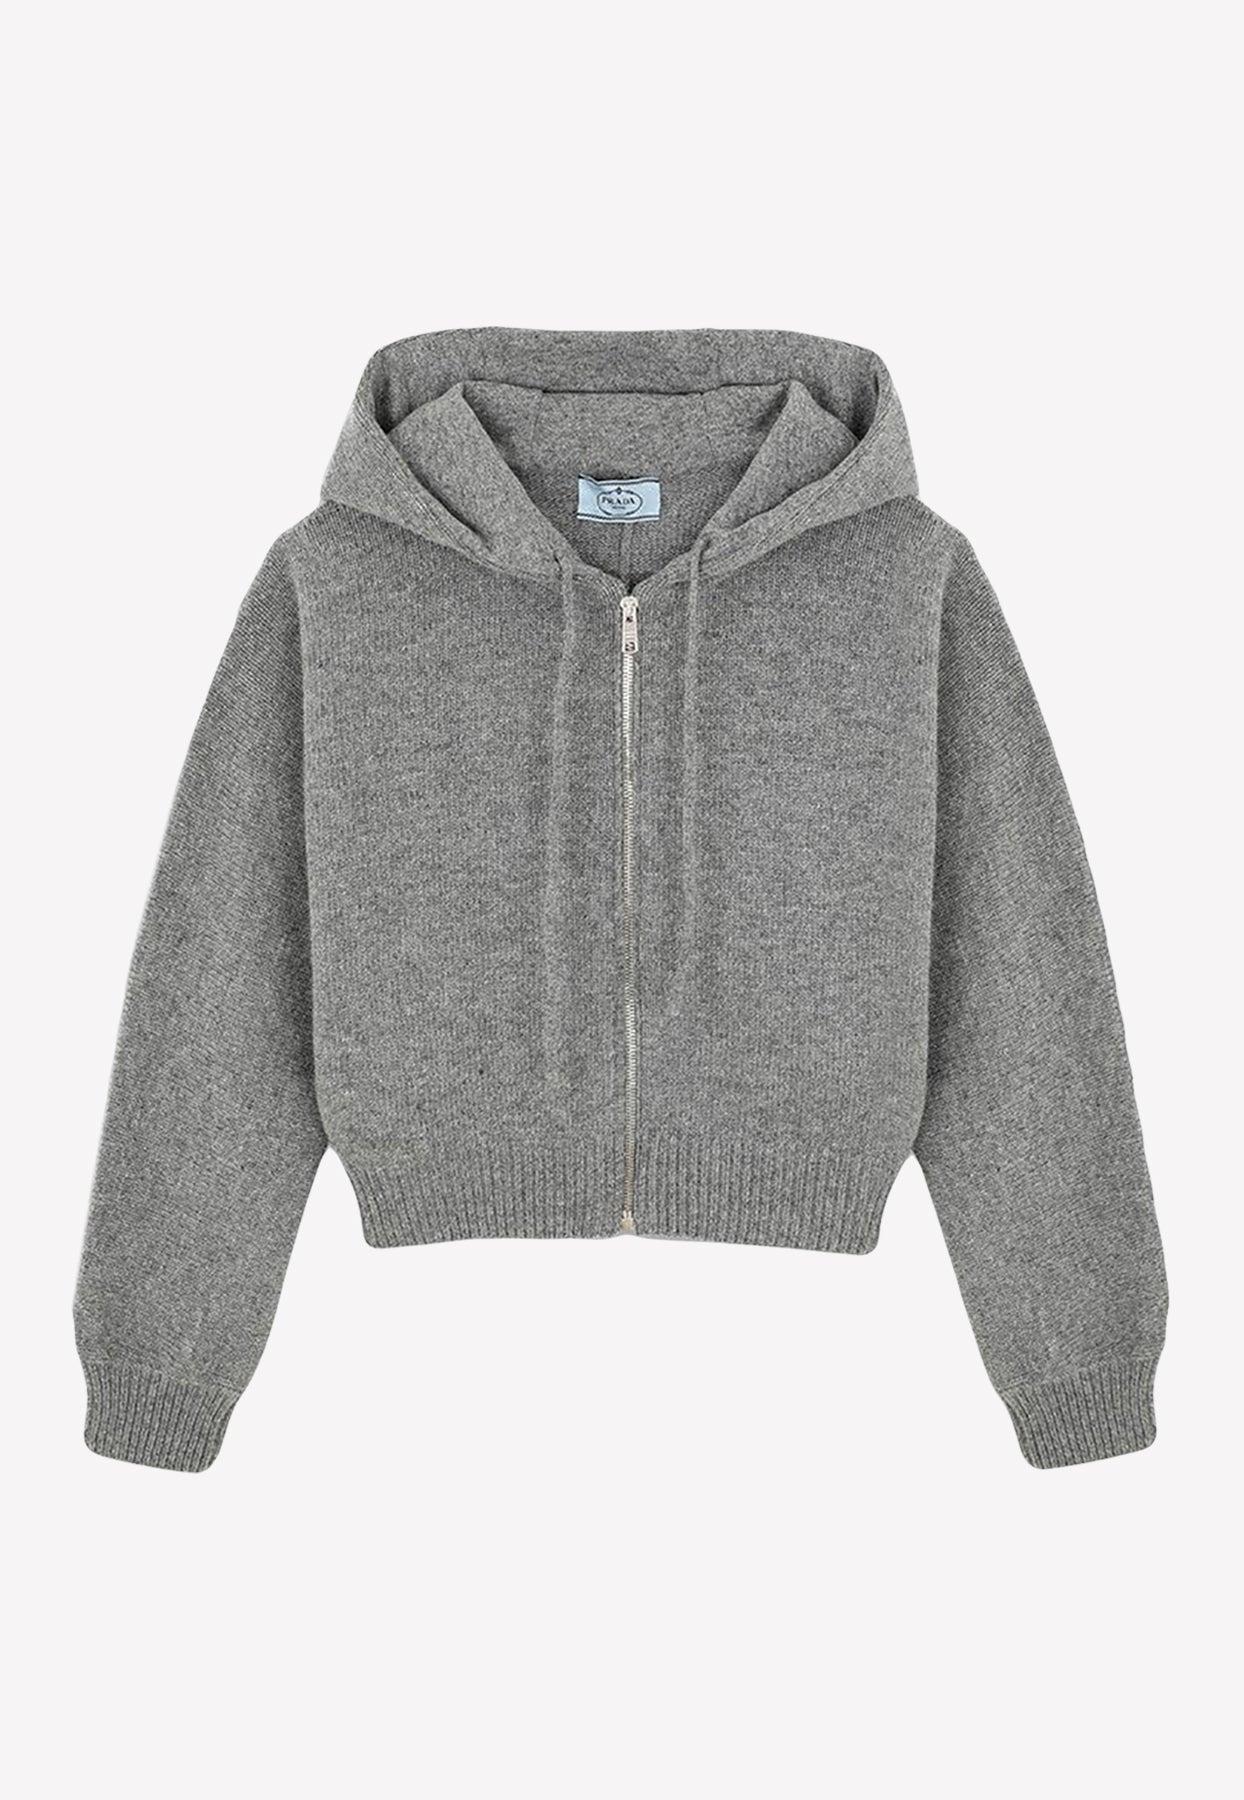 Prada Wool And Cashmere Zip-up Hoodie in Gray | Lyst